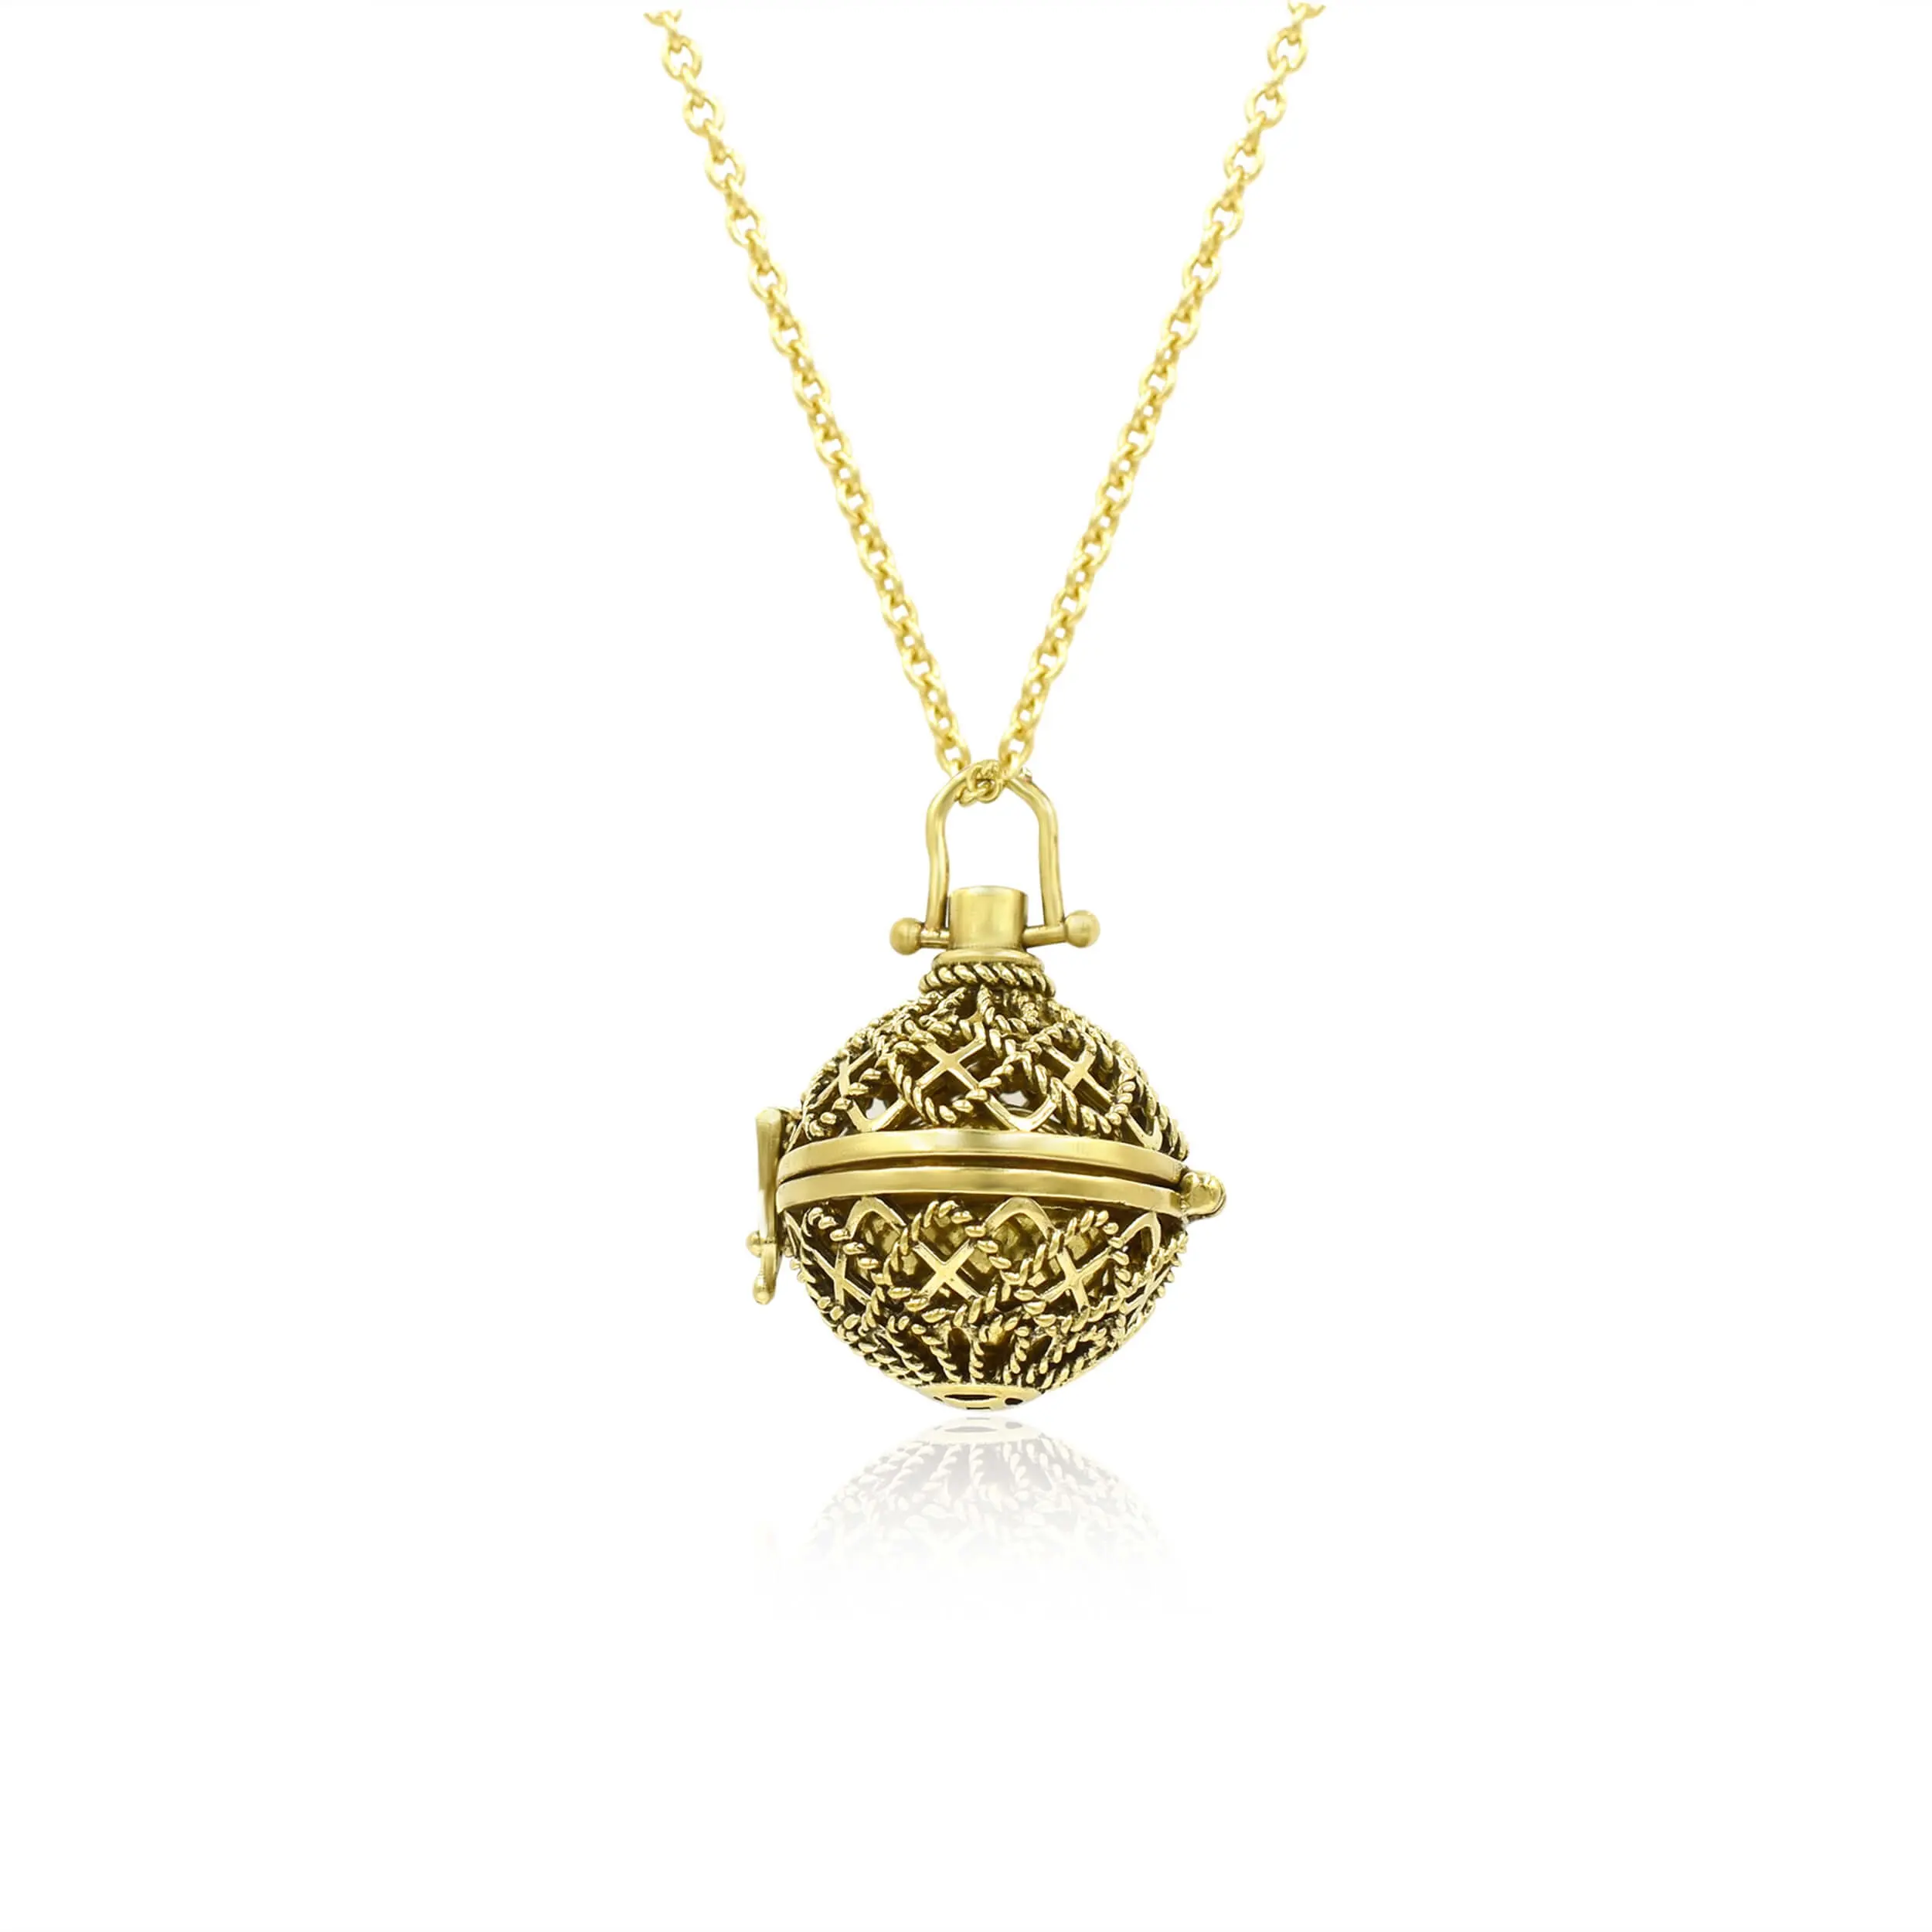 Unique design open locket music ball sound pendant charm gold plated brass finished jewelry pregnant future mom gift for her